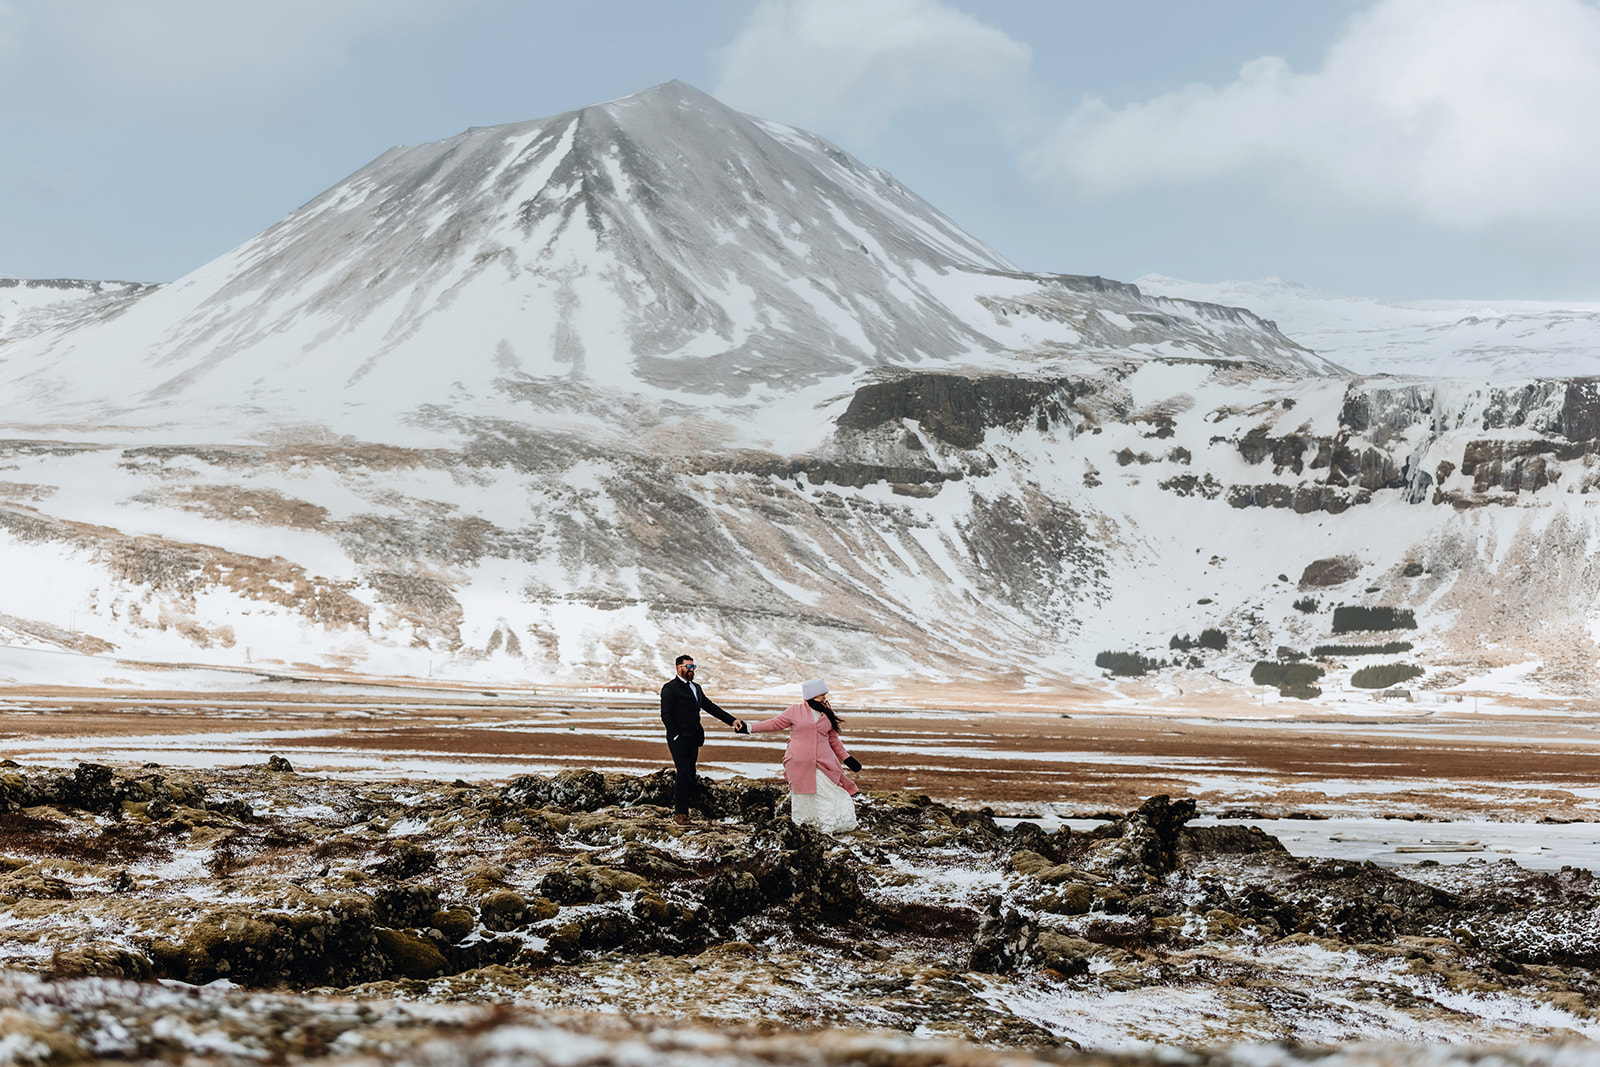 Wedding photography in the snowy winter landscape with mountains in Iceland